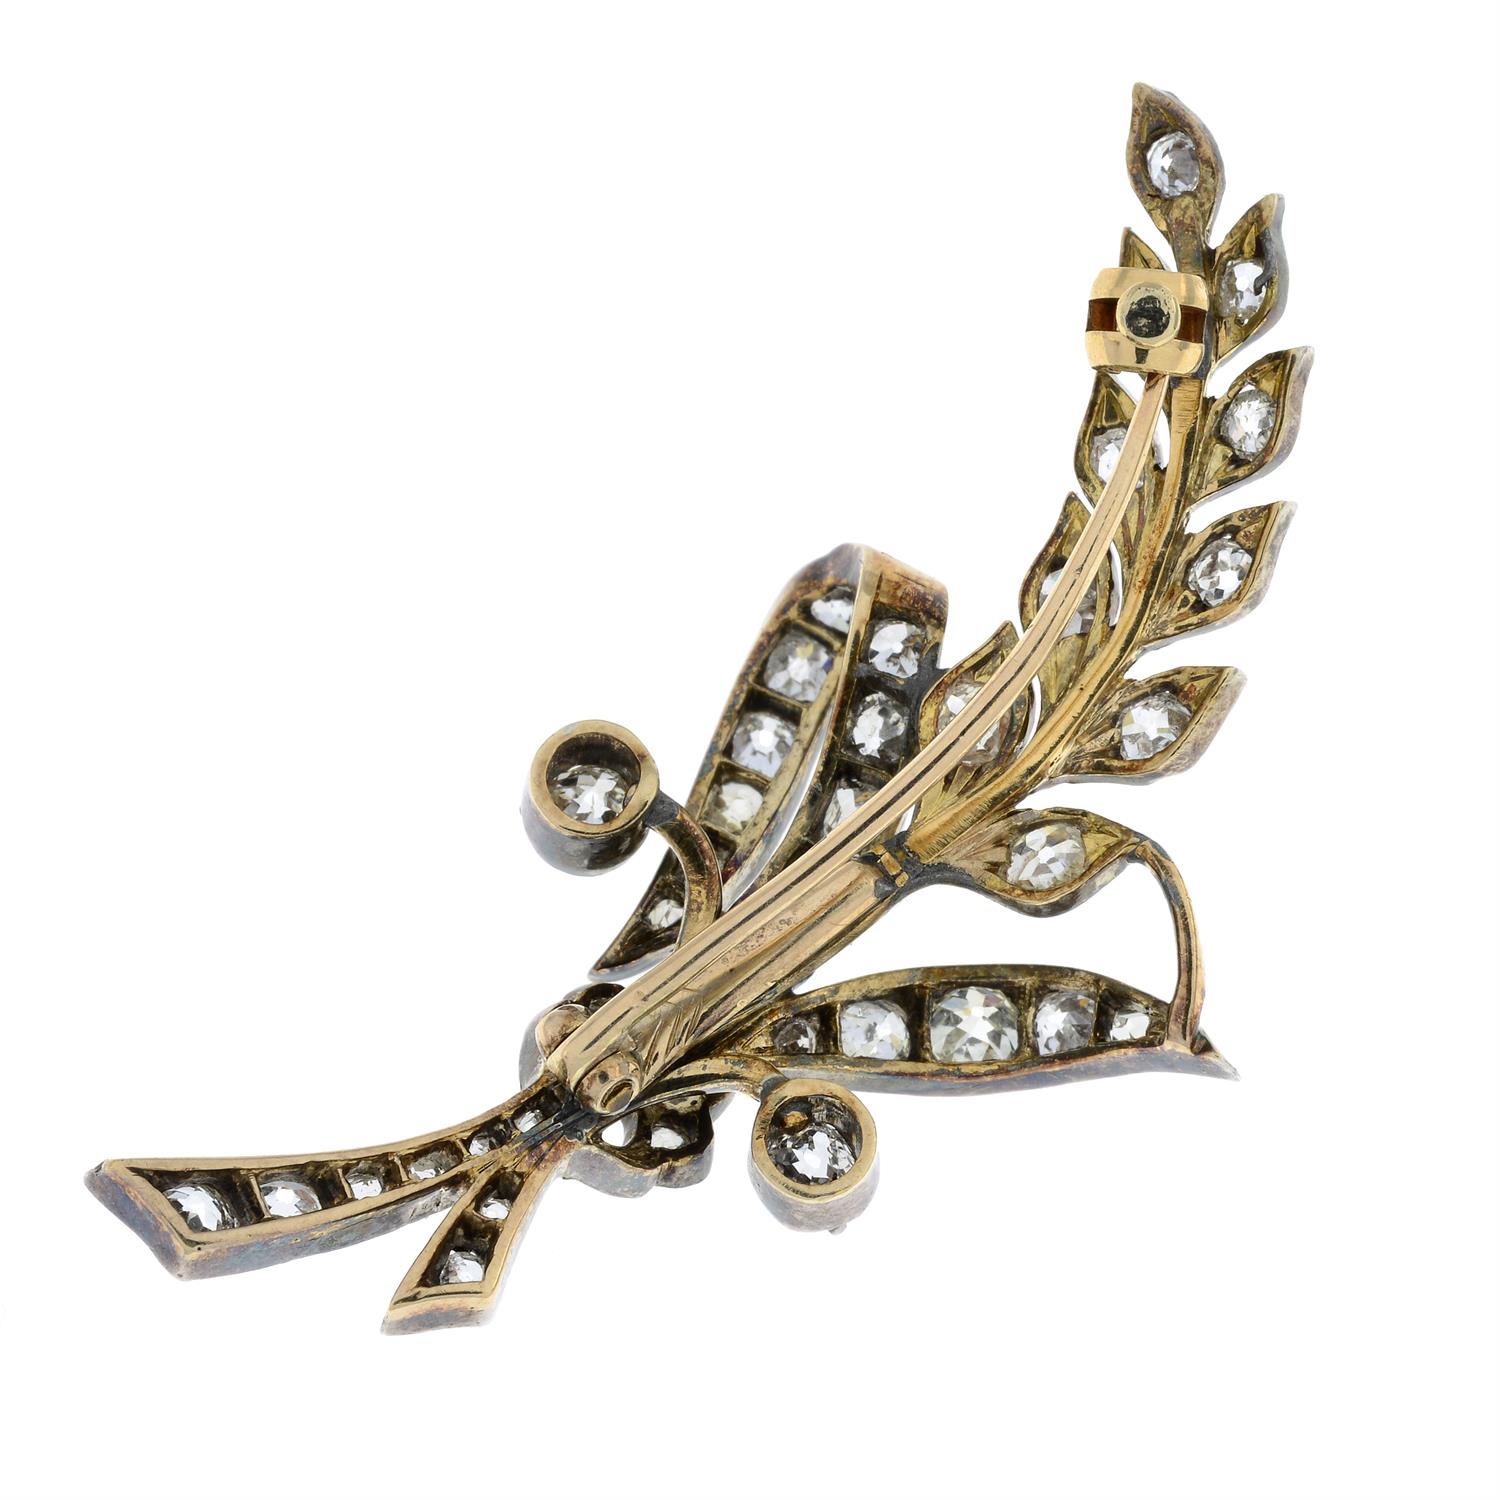 19th century silver and gold diamond floral brooch - Image 3 of 4